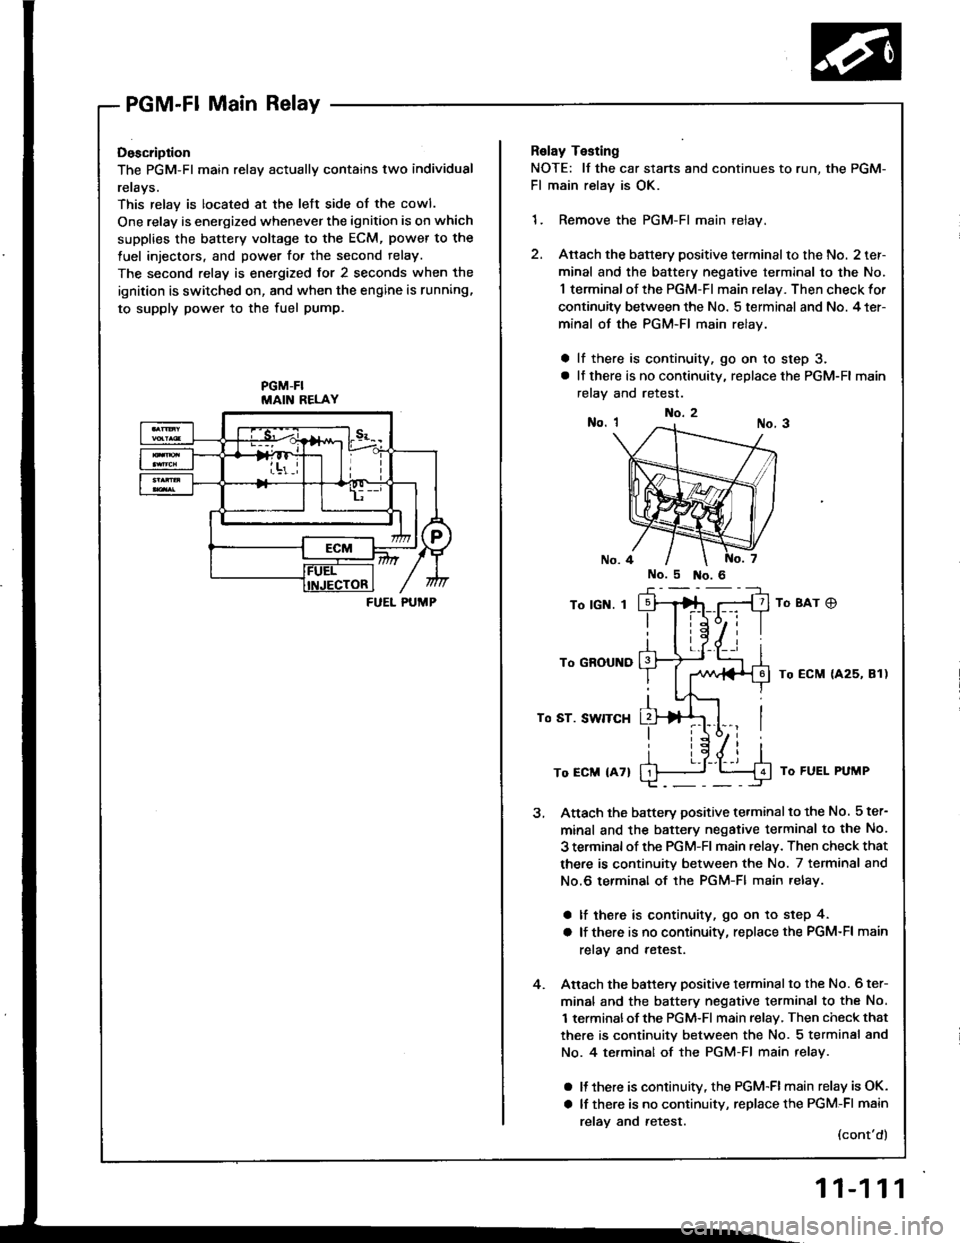 HONDA INTEGRA 1994 4.G Workshop Manual PGM-Fl Main Relay
Doscription
The PGM-Fl main relav actuallv contains two individual
rerays.
This relay is located at the lett side of the cowl.
One relay is energized whenever the ignition is on whic